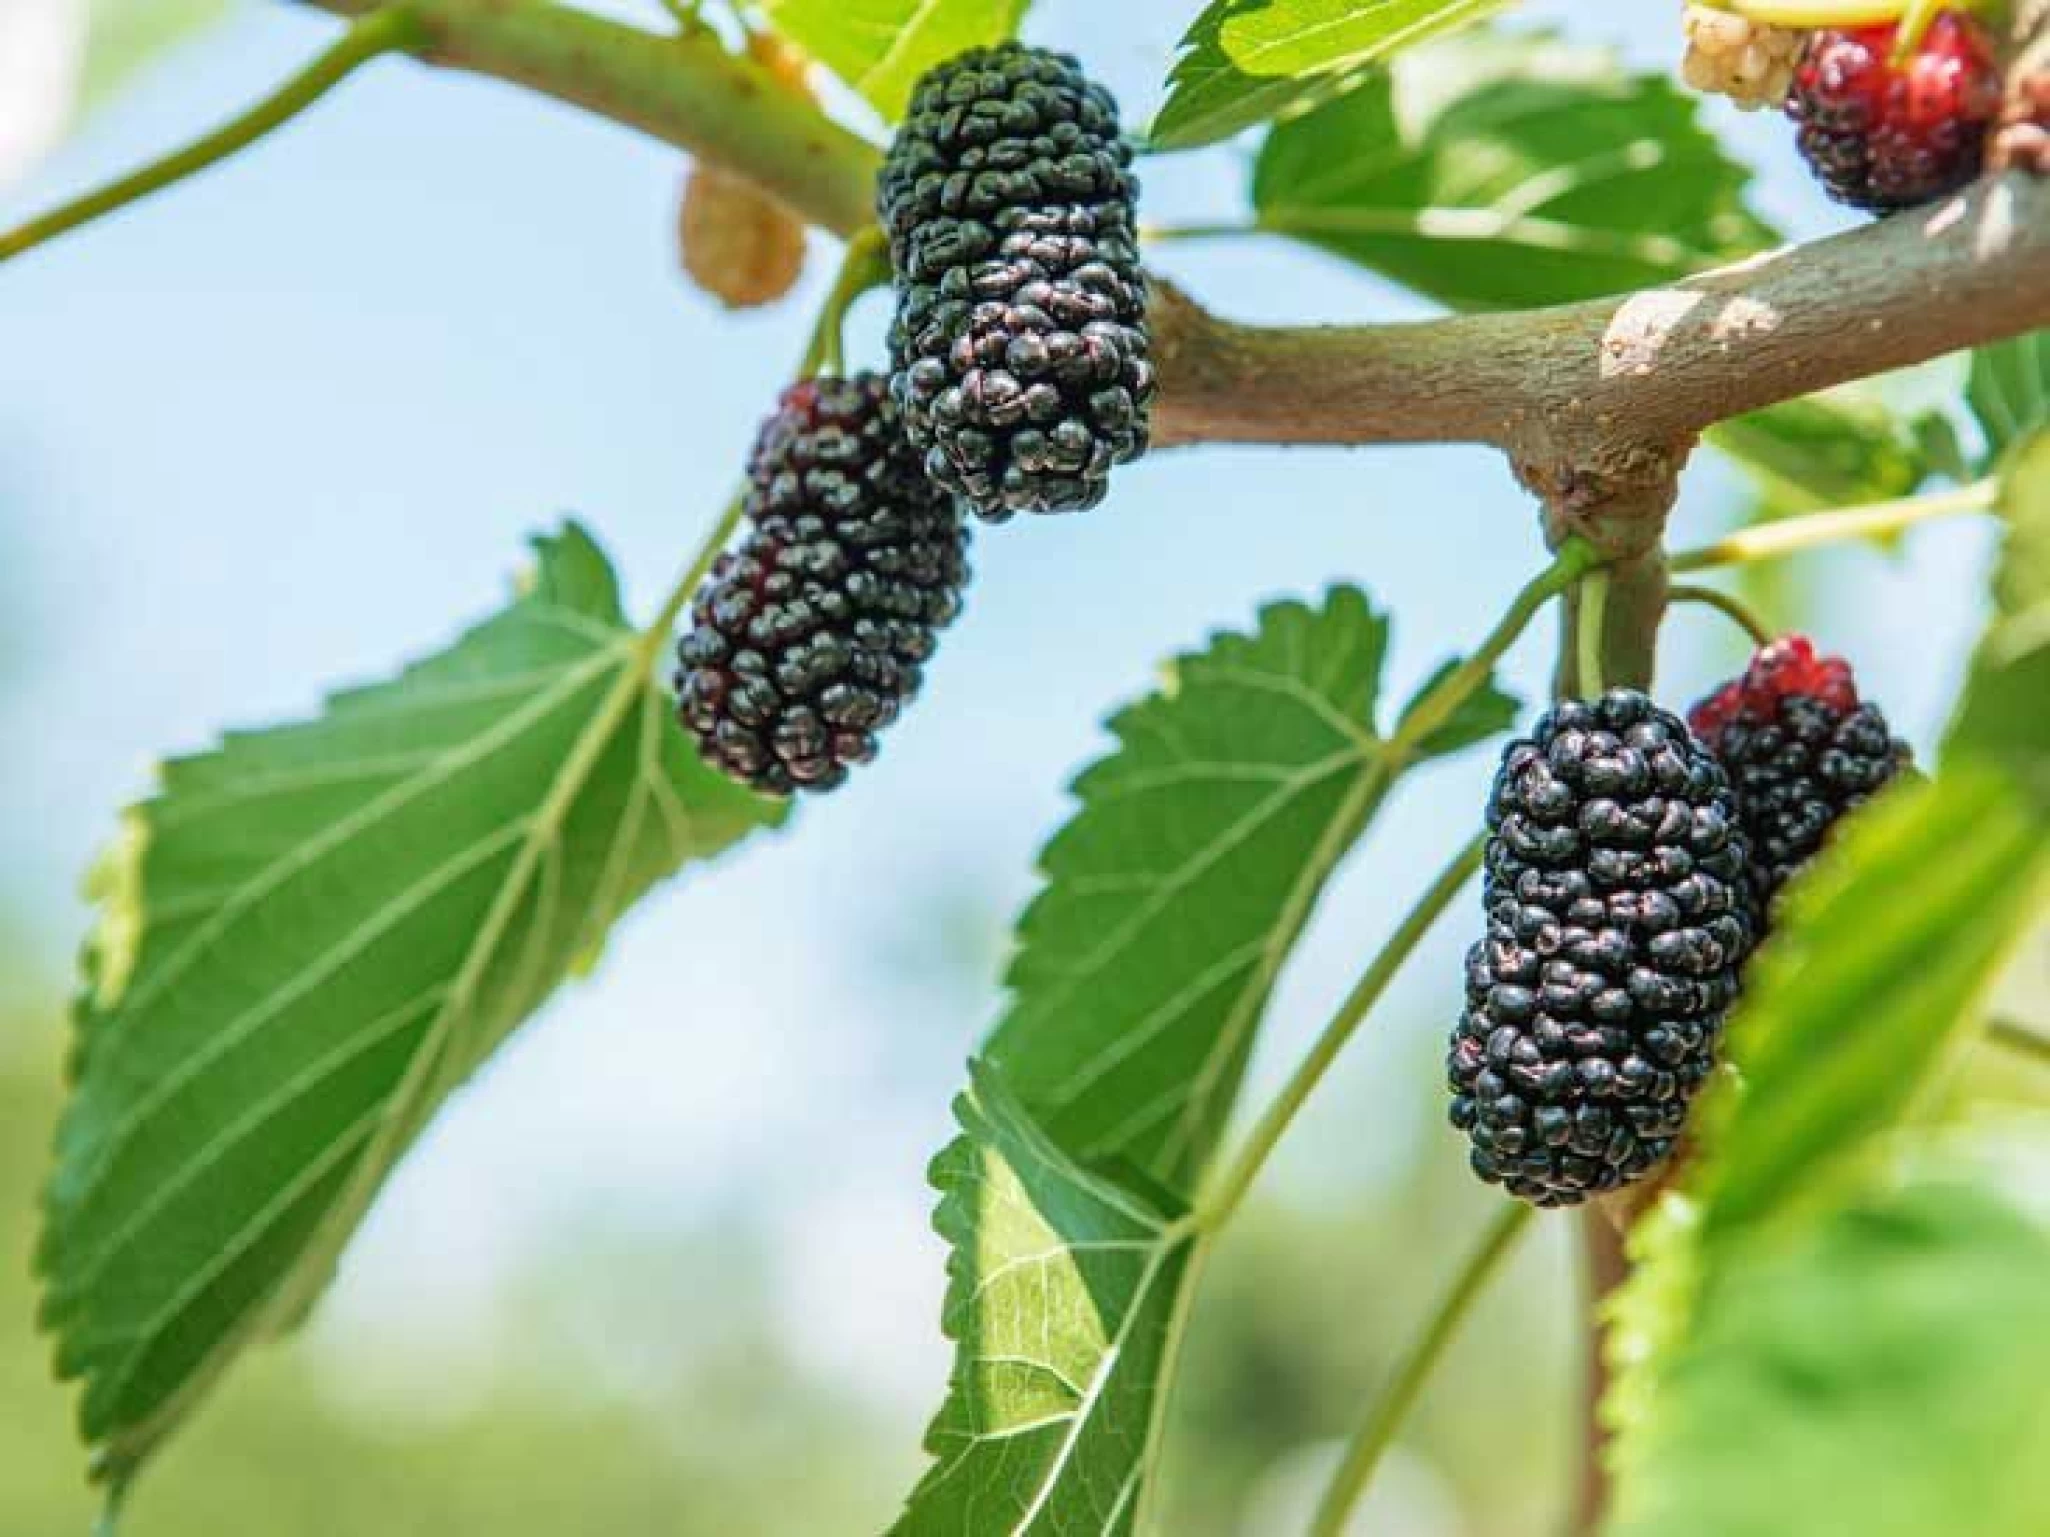 Mulberry Seeds: Precautions, Side Effects And Benefits